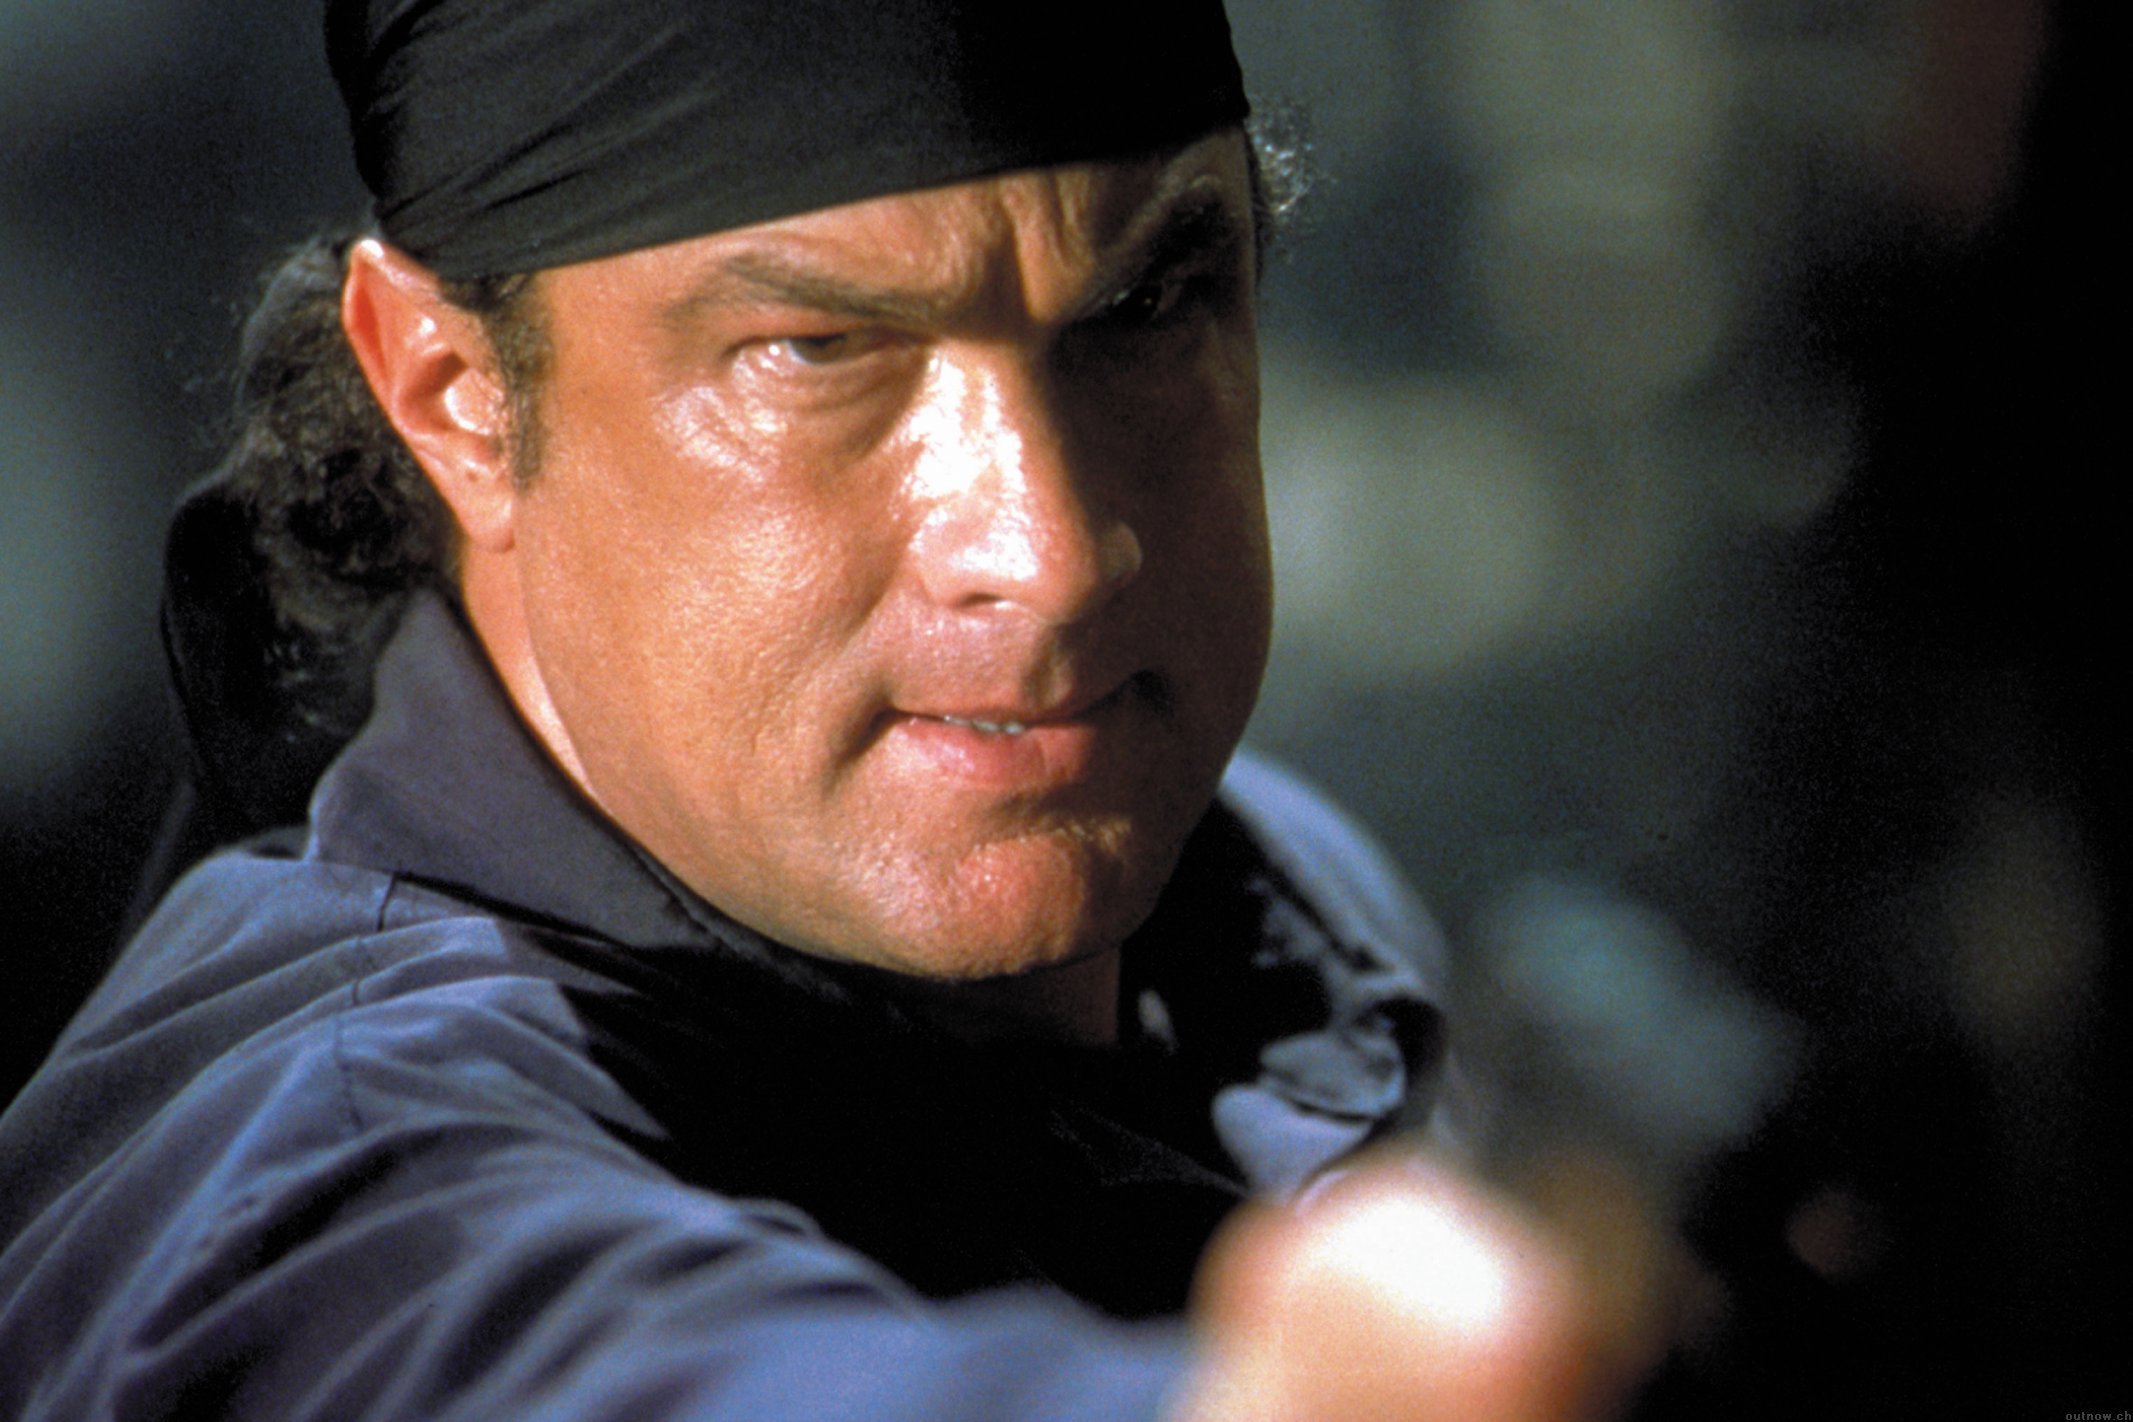 Image: Steven Seagal: Mass Shootings in the US are ‘Engineered’ (Video)